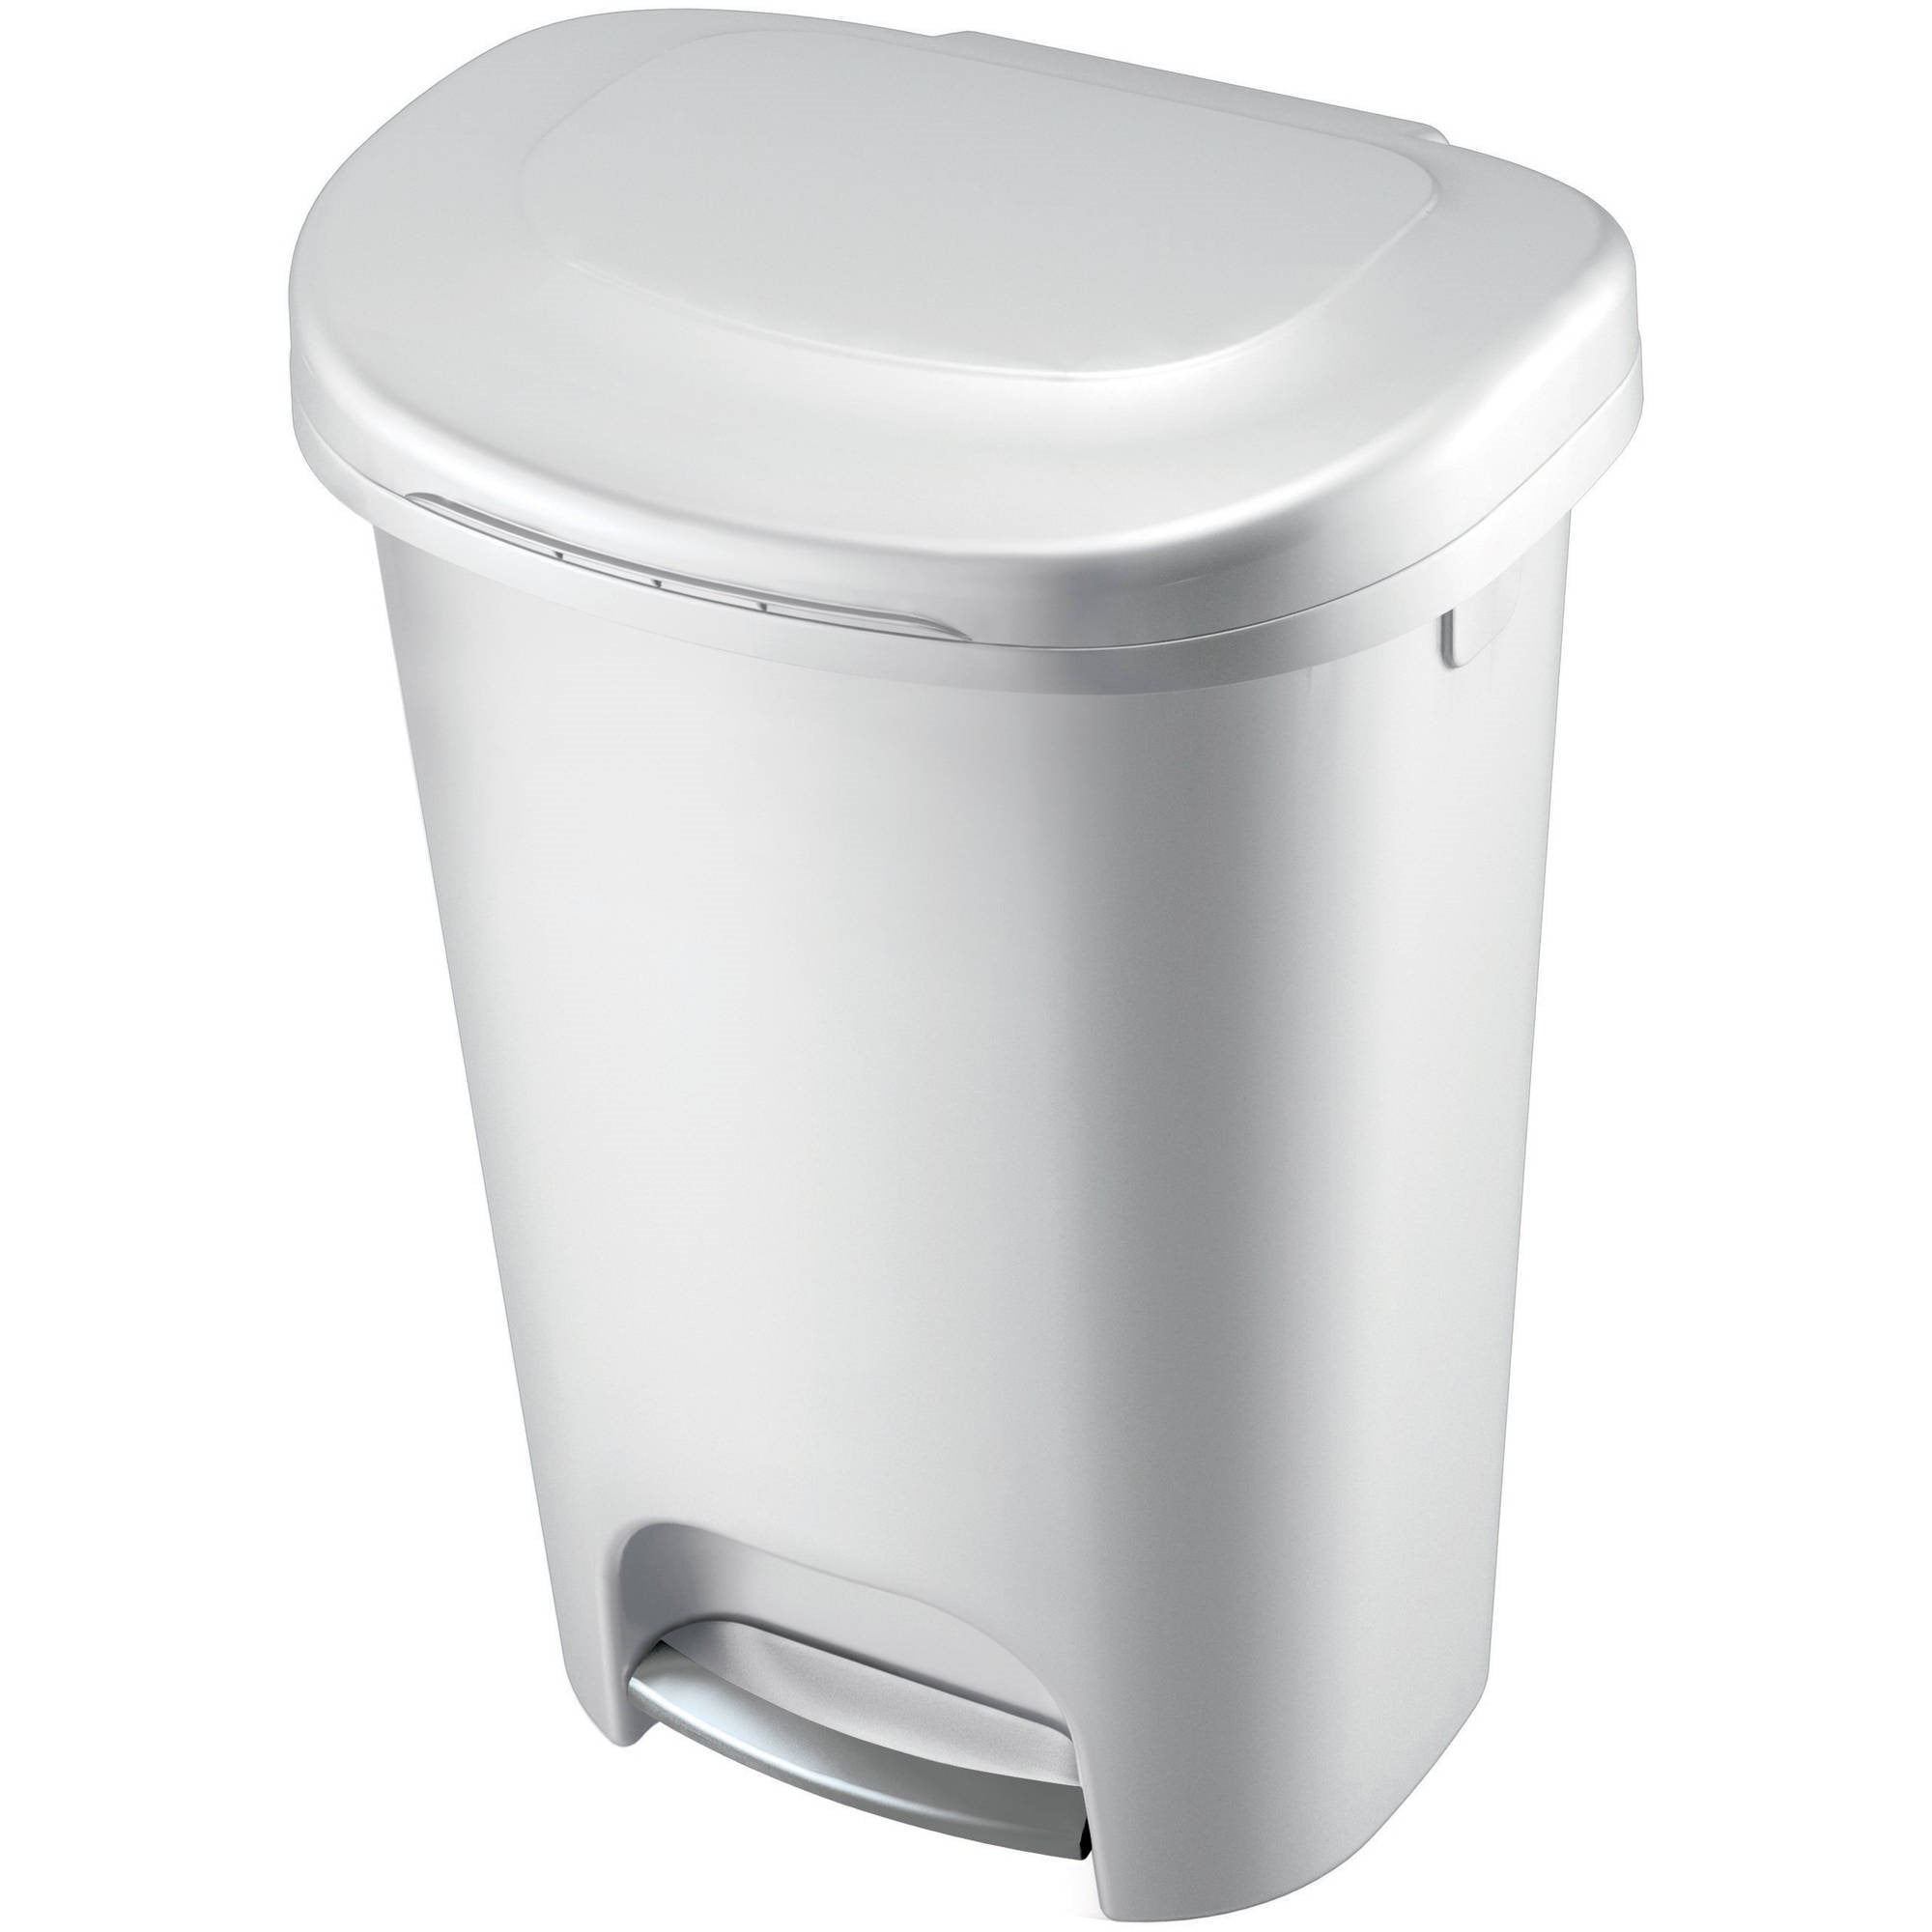 Rubbermaid Spring Top Kitchen Bathroom Trash Can with Lid, 13-Gallon,  White, Plastic Garbage Bin/Wastebasket for Home/Kitchen/Bathroom/Garage